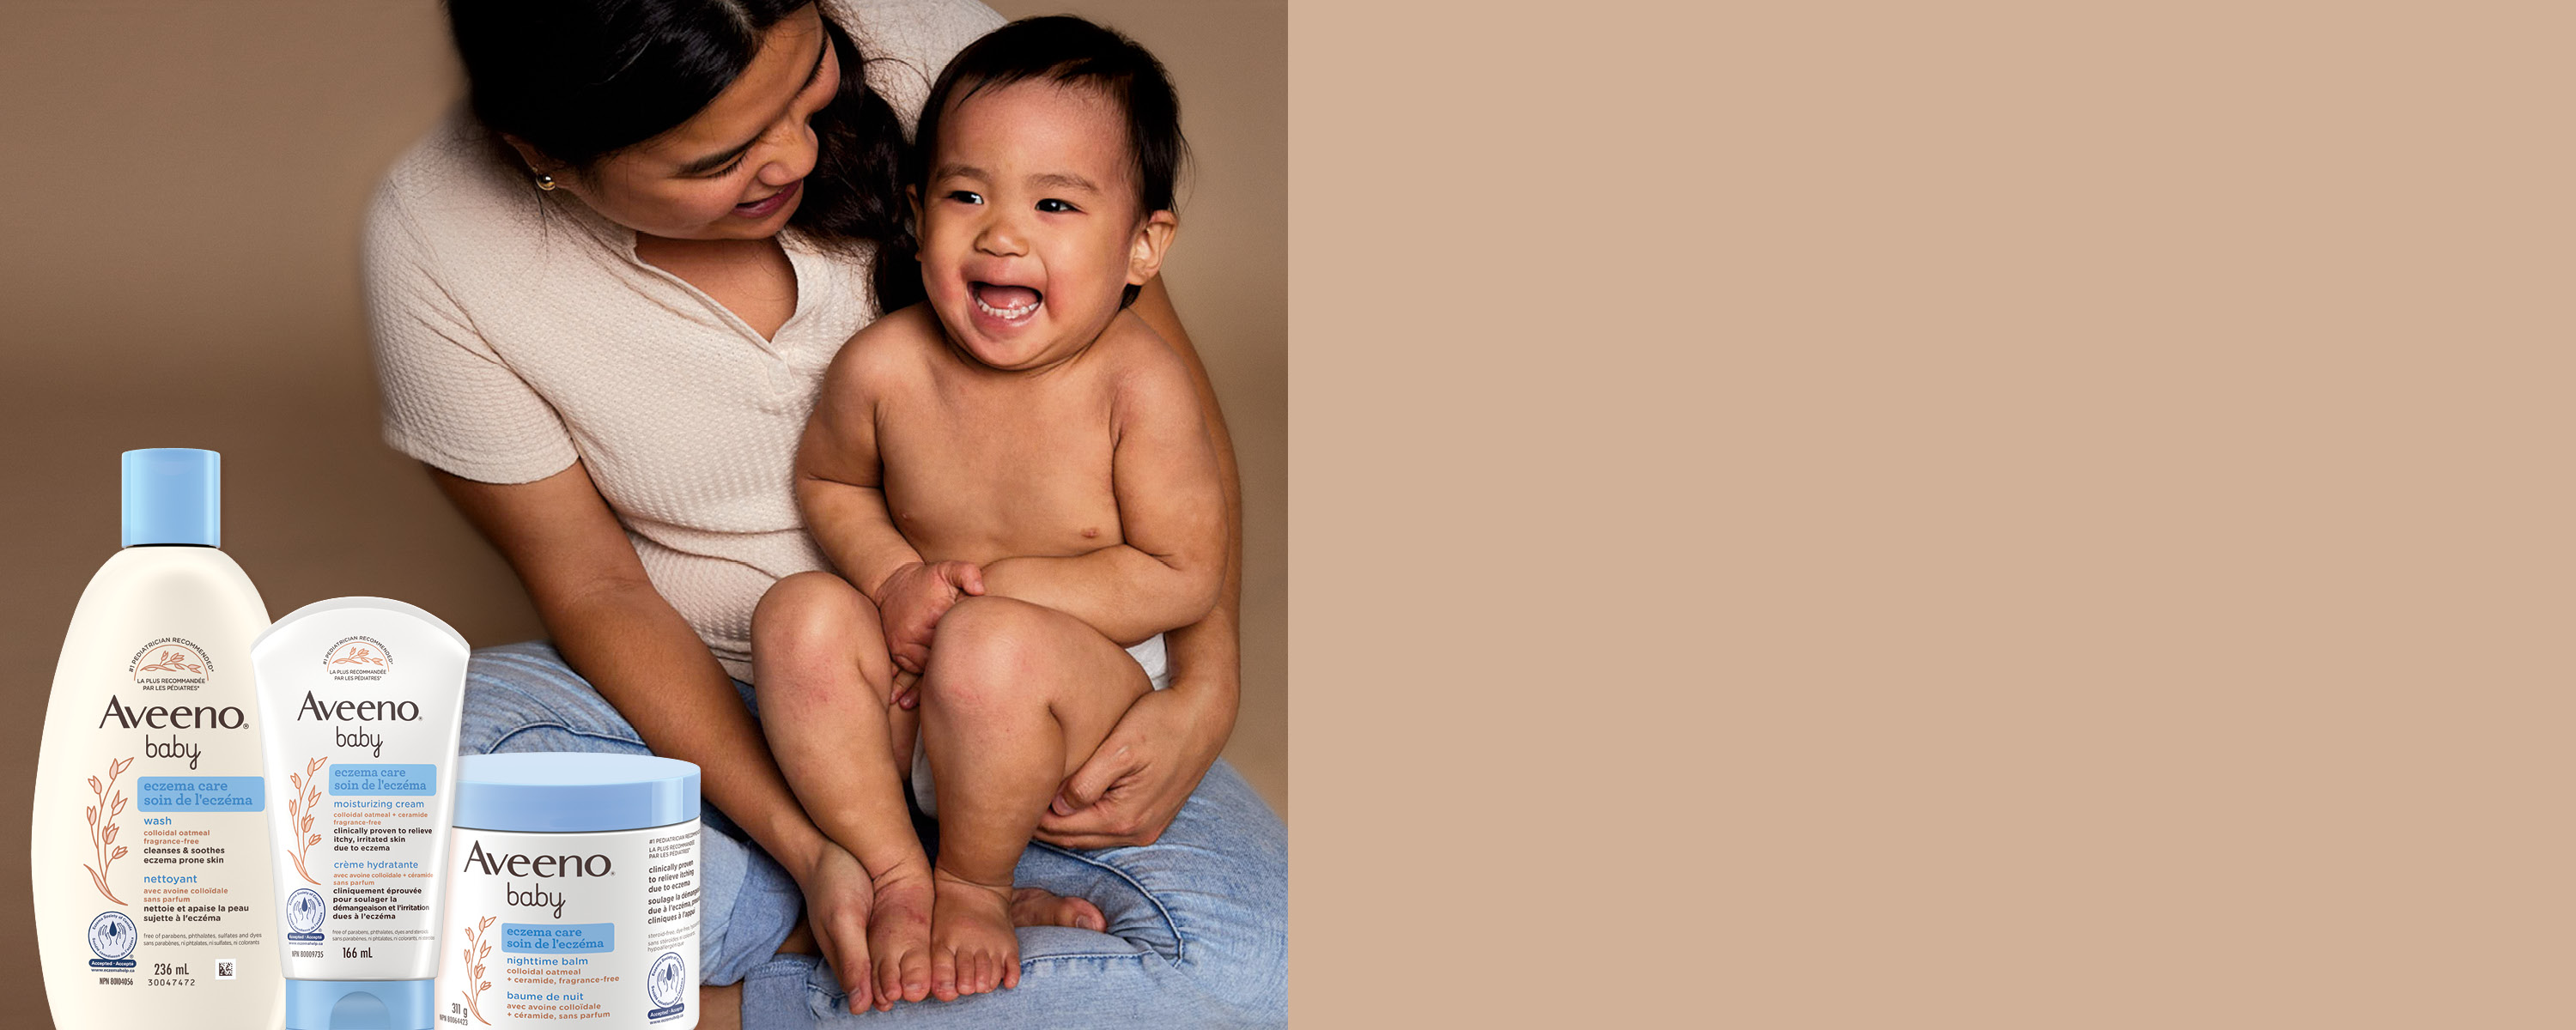 Banner with three Aveeno Baby eczema products and a young mother holding her baby at the background.